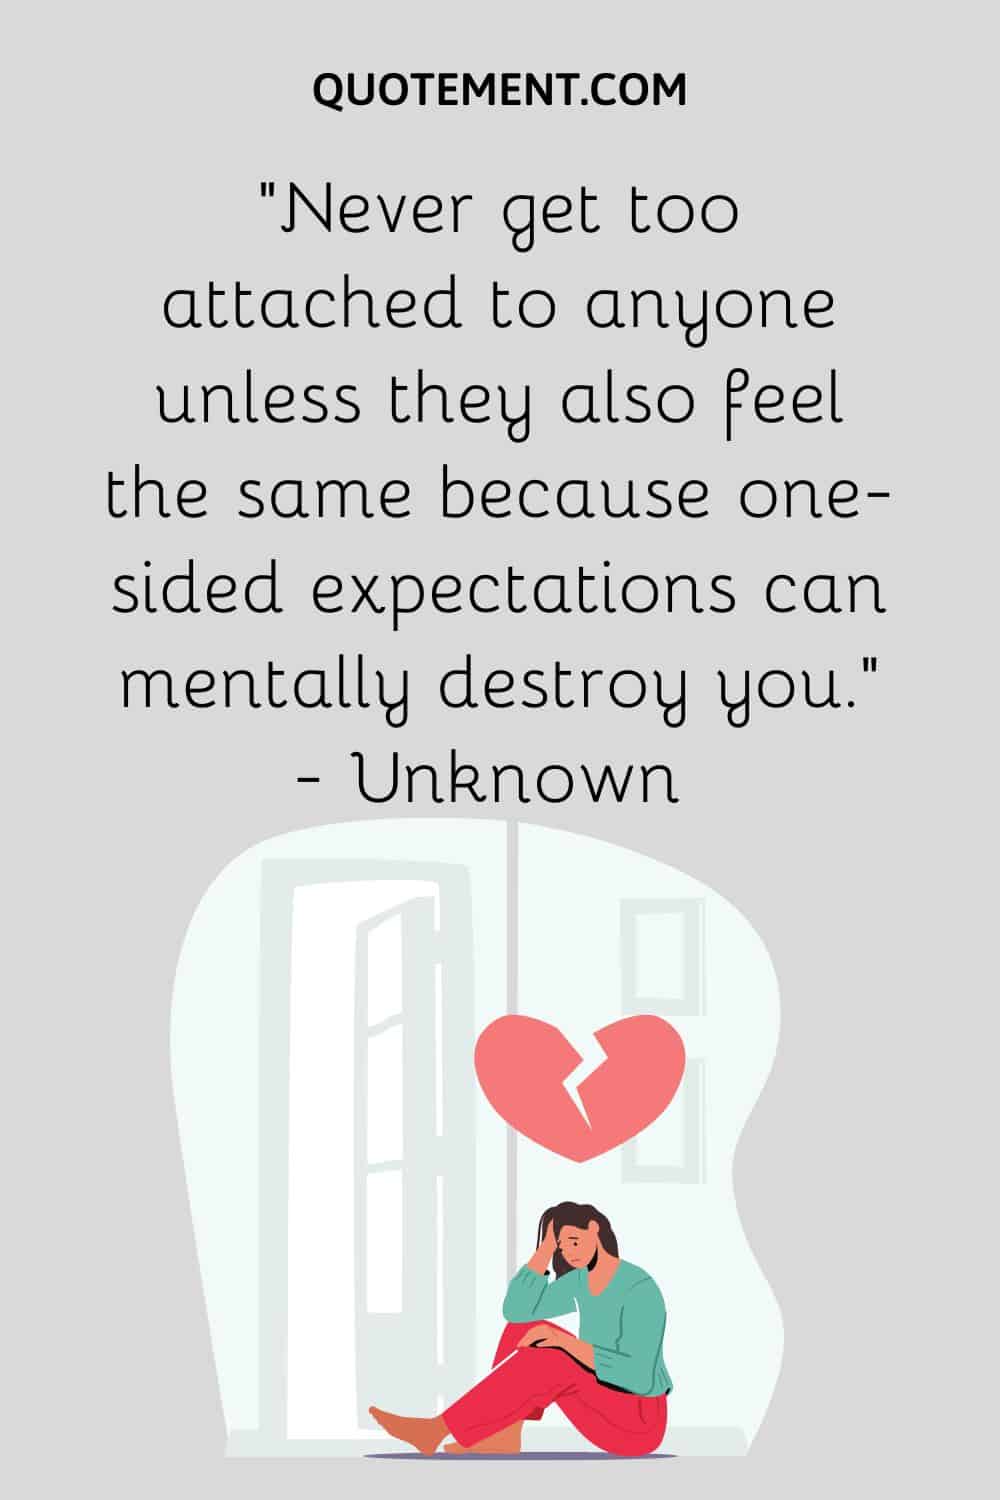 Never get too attached to anyone unless they also feel the same because one-sided expectations can mentally destroy you